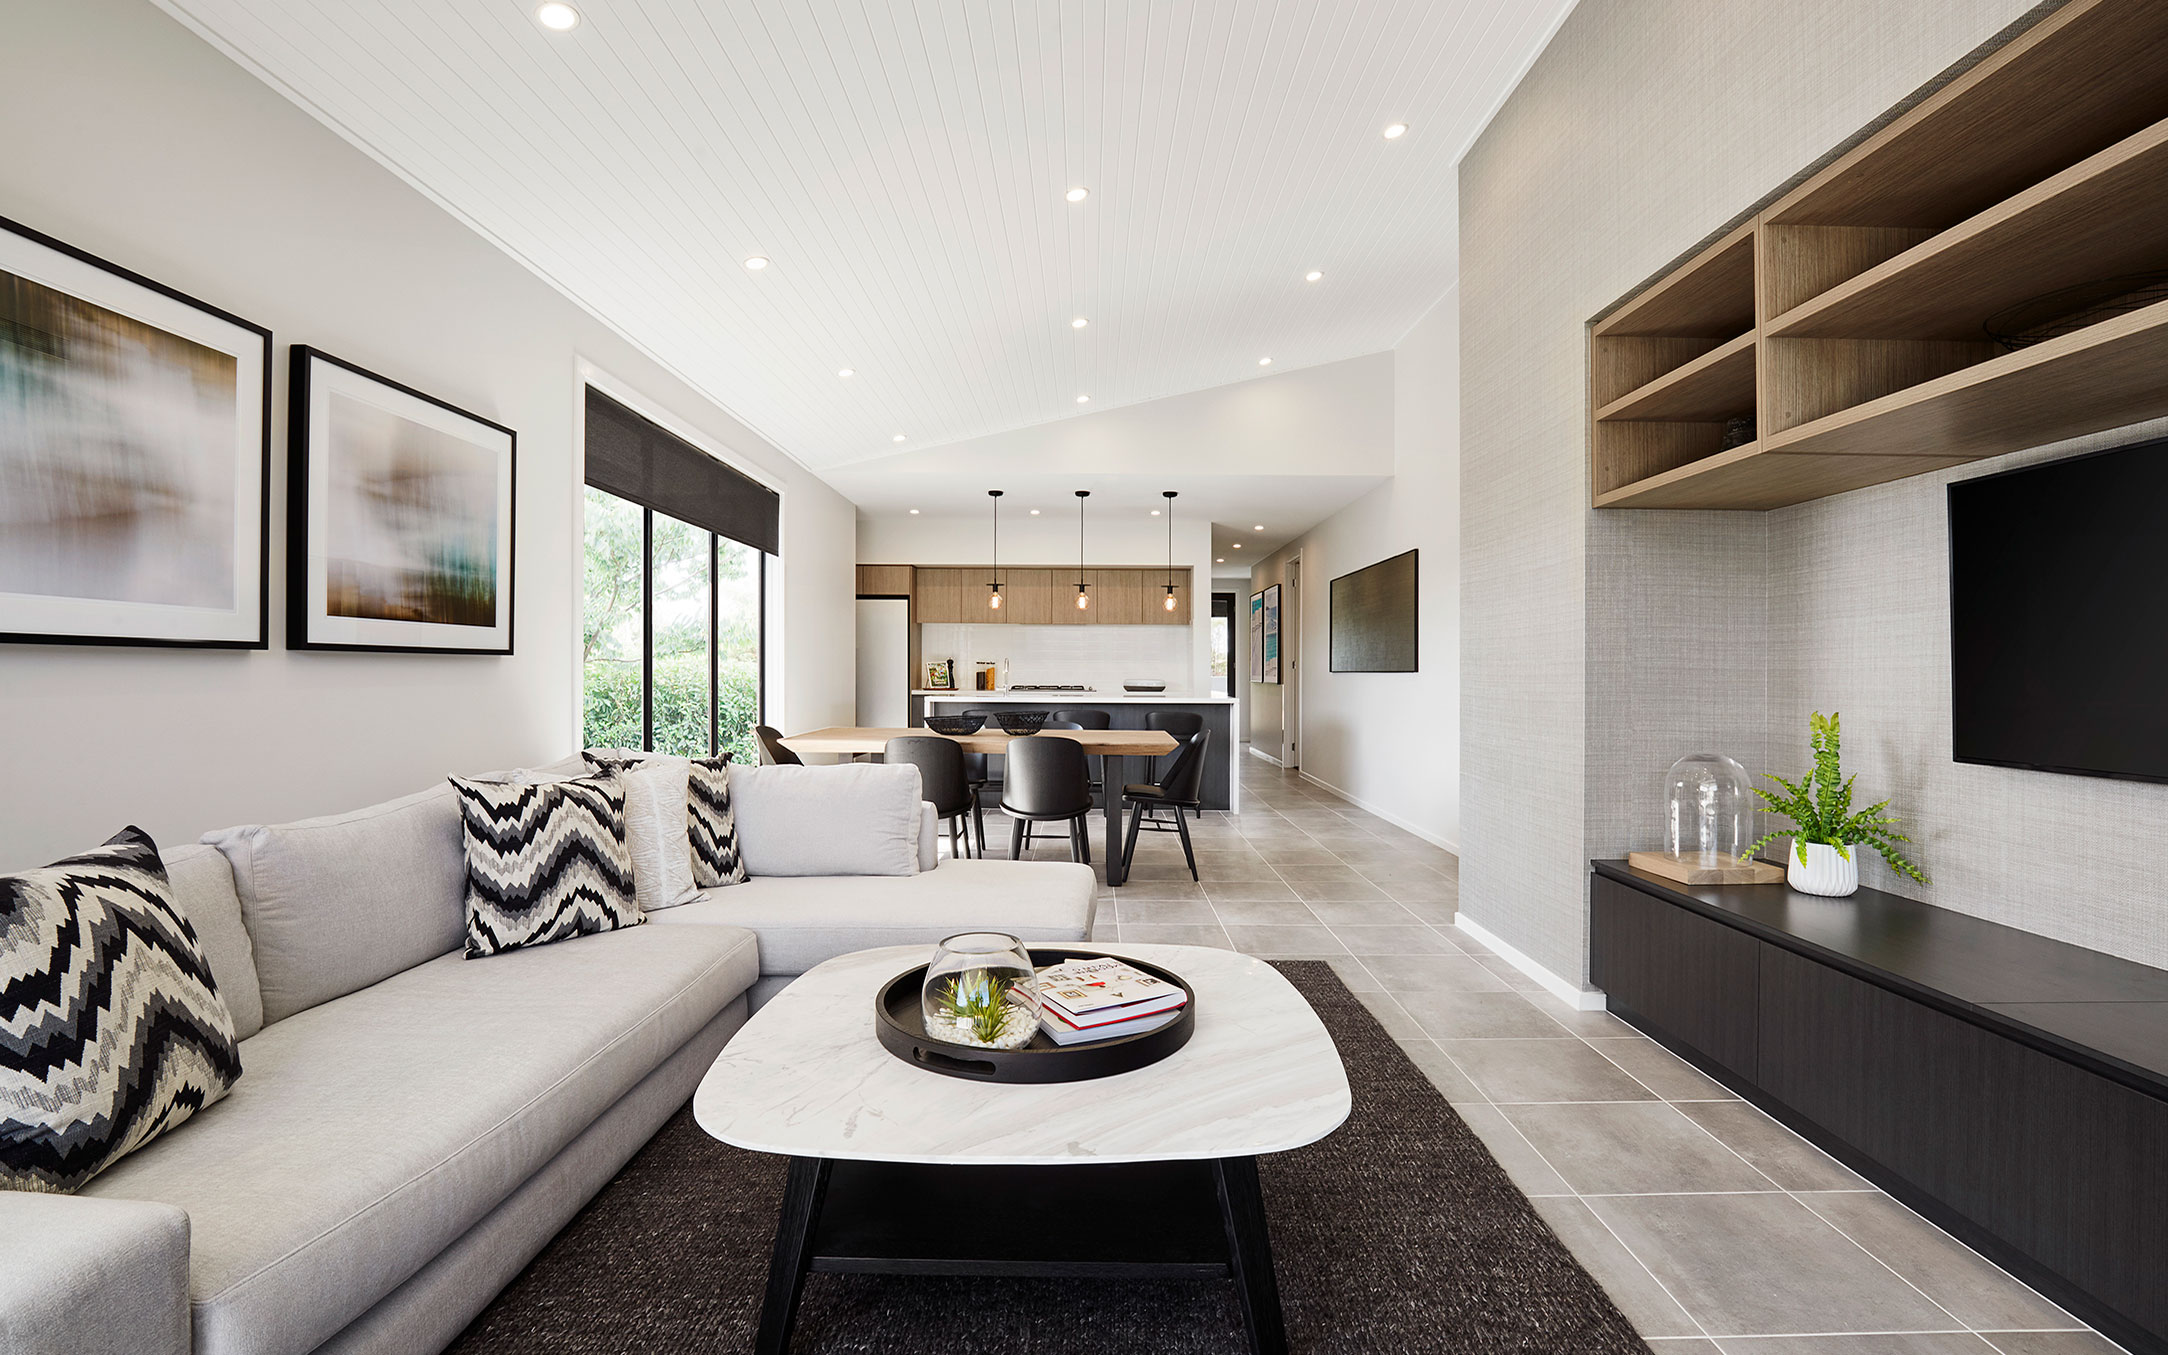 Sienna Home Design Lounge Area at Airds Display Village